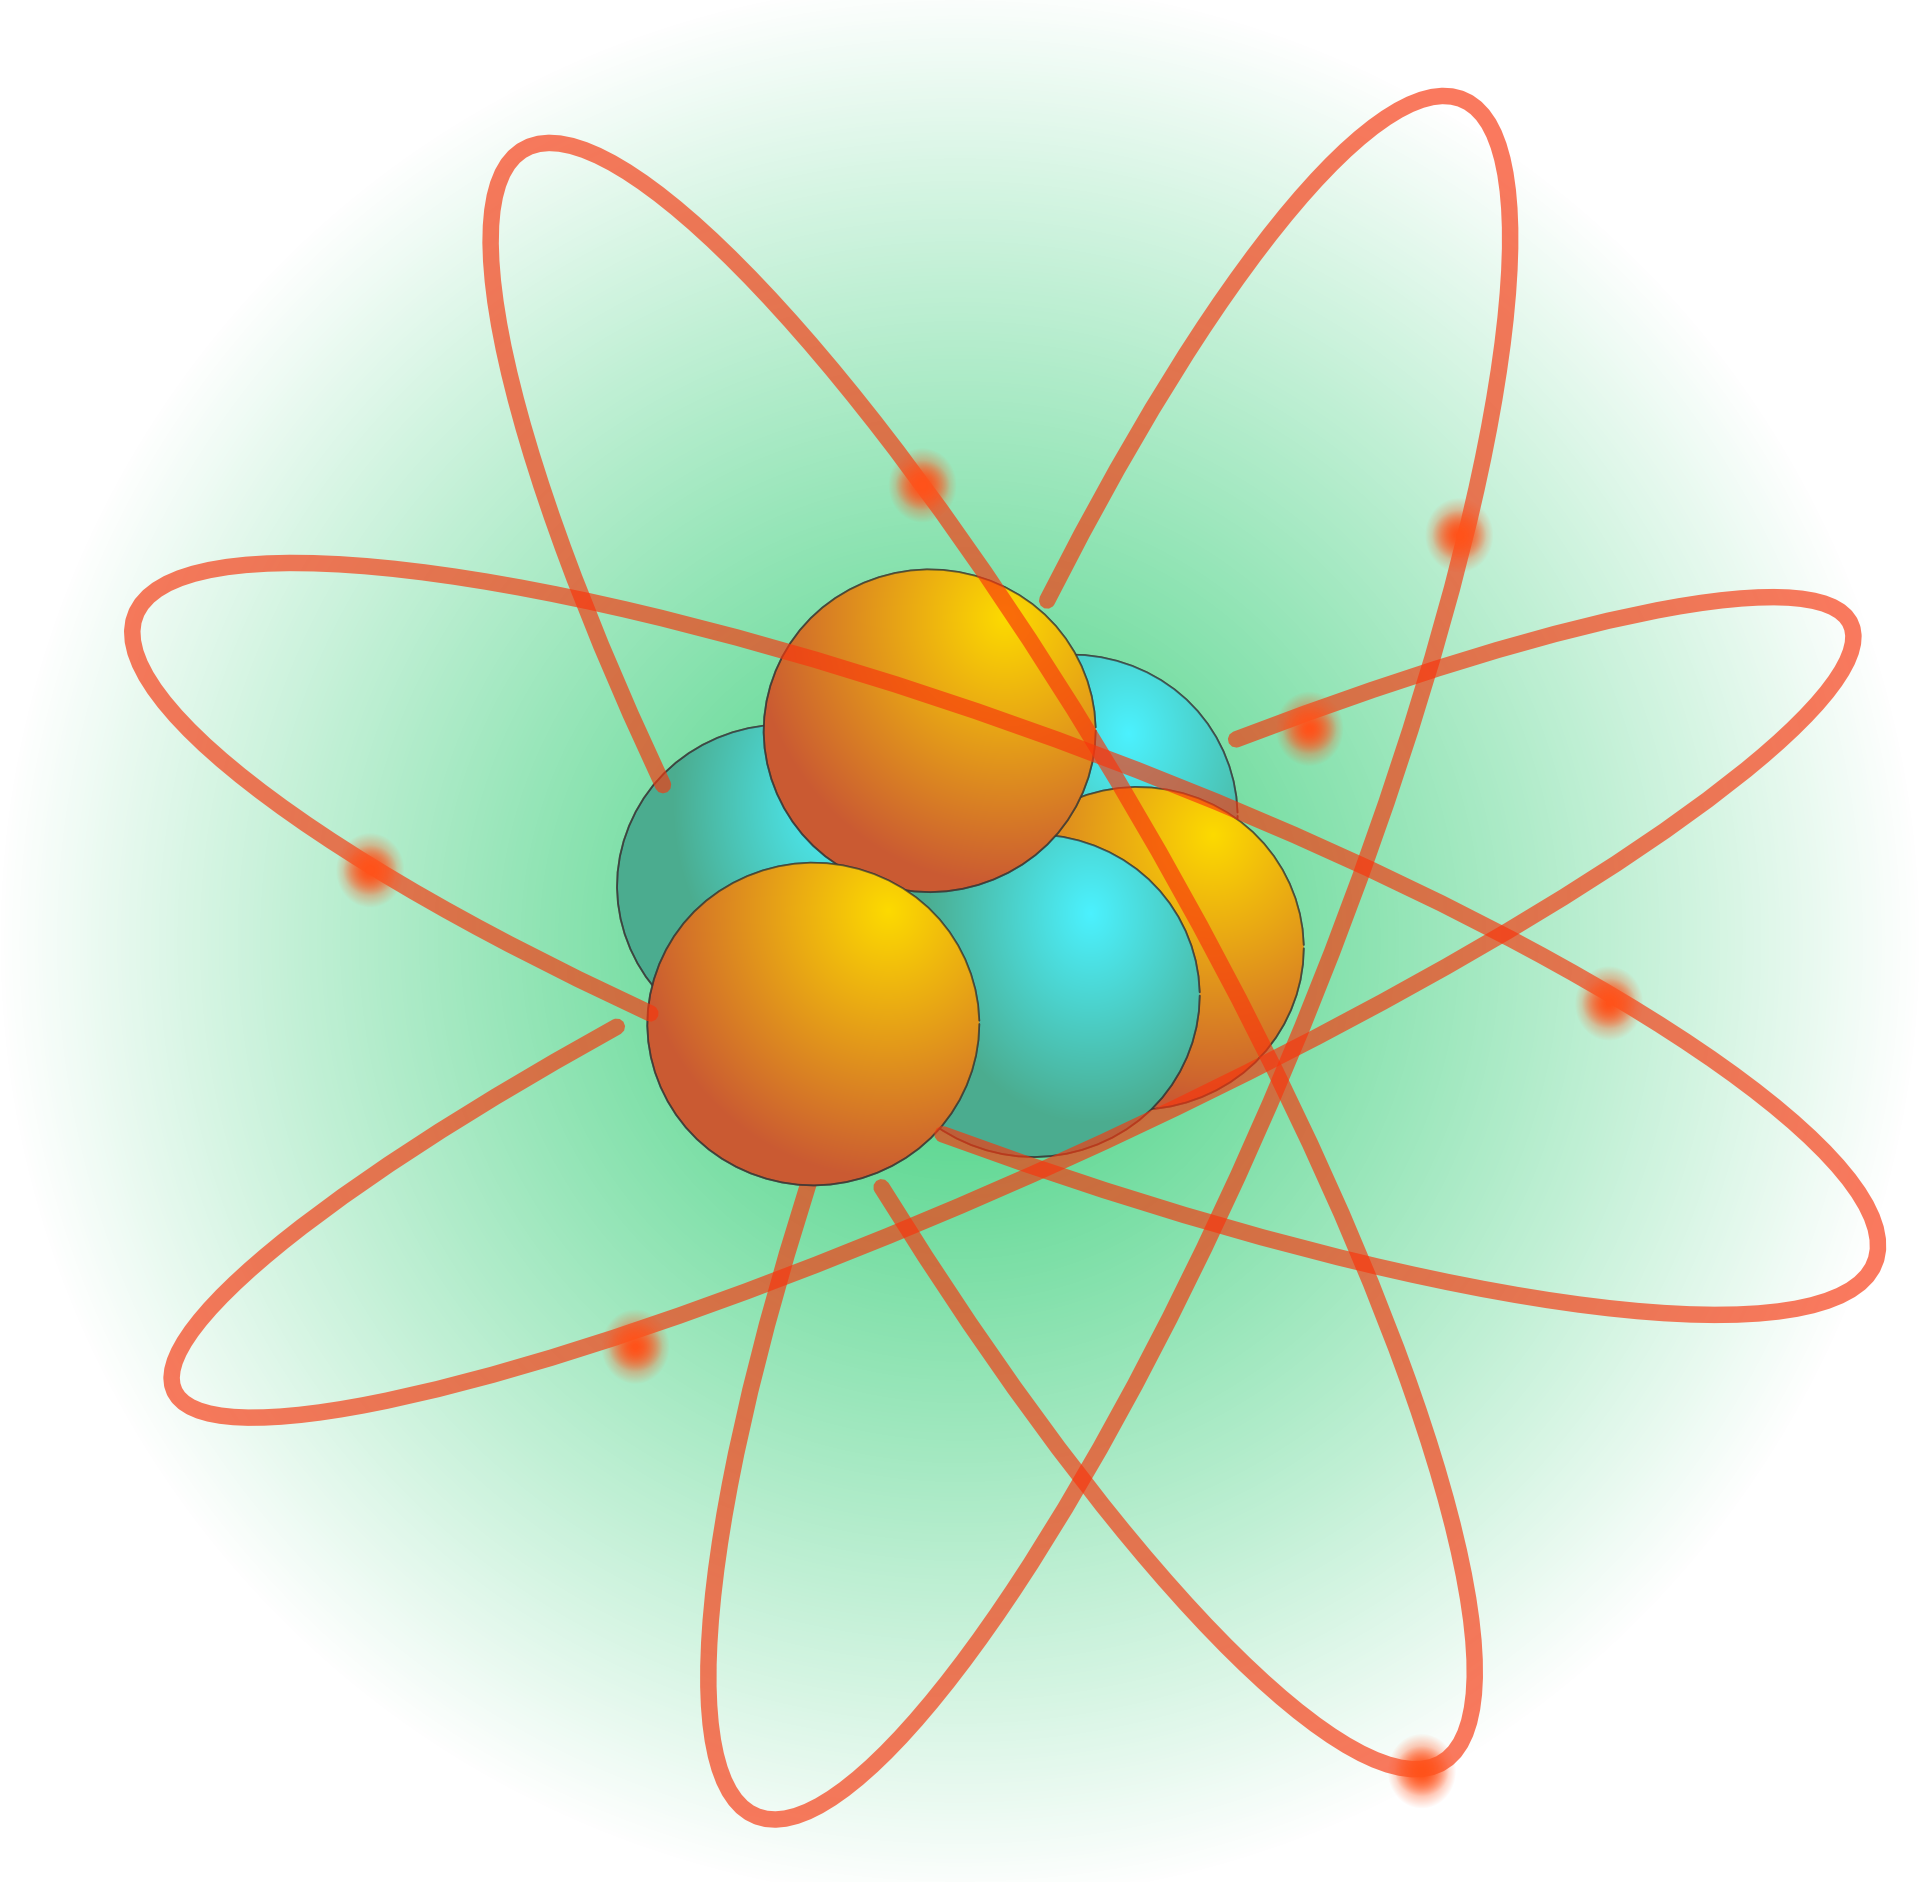 What is atom?